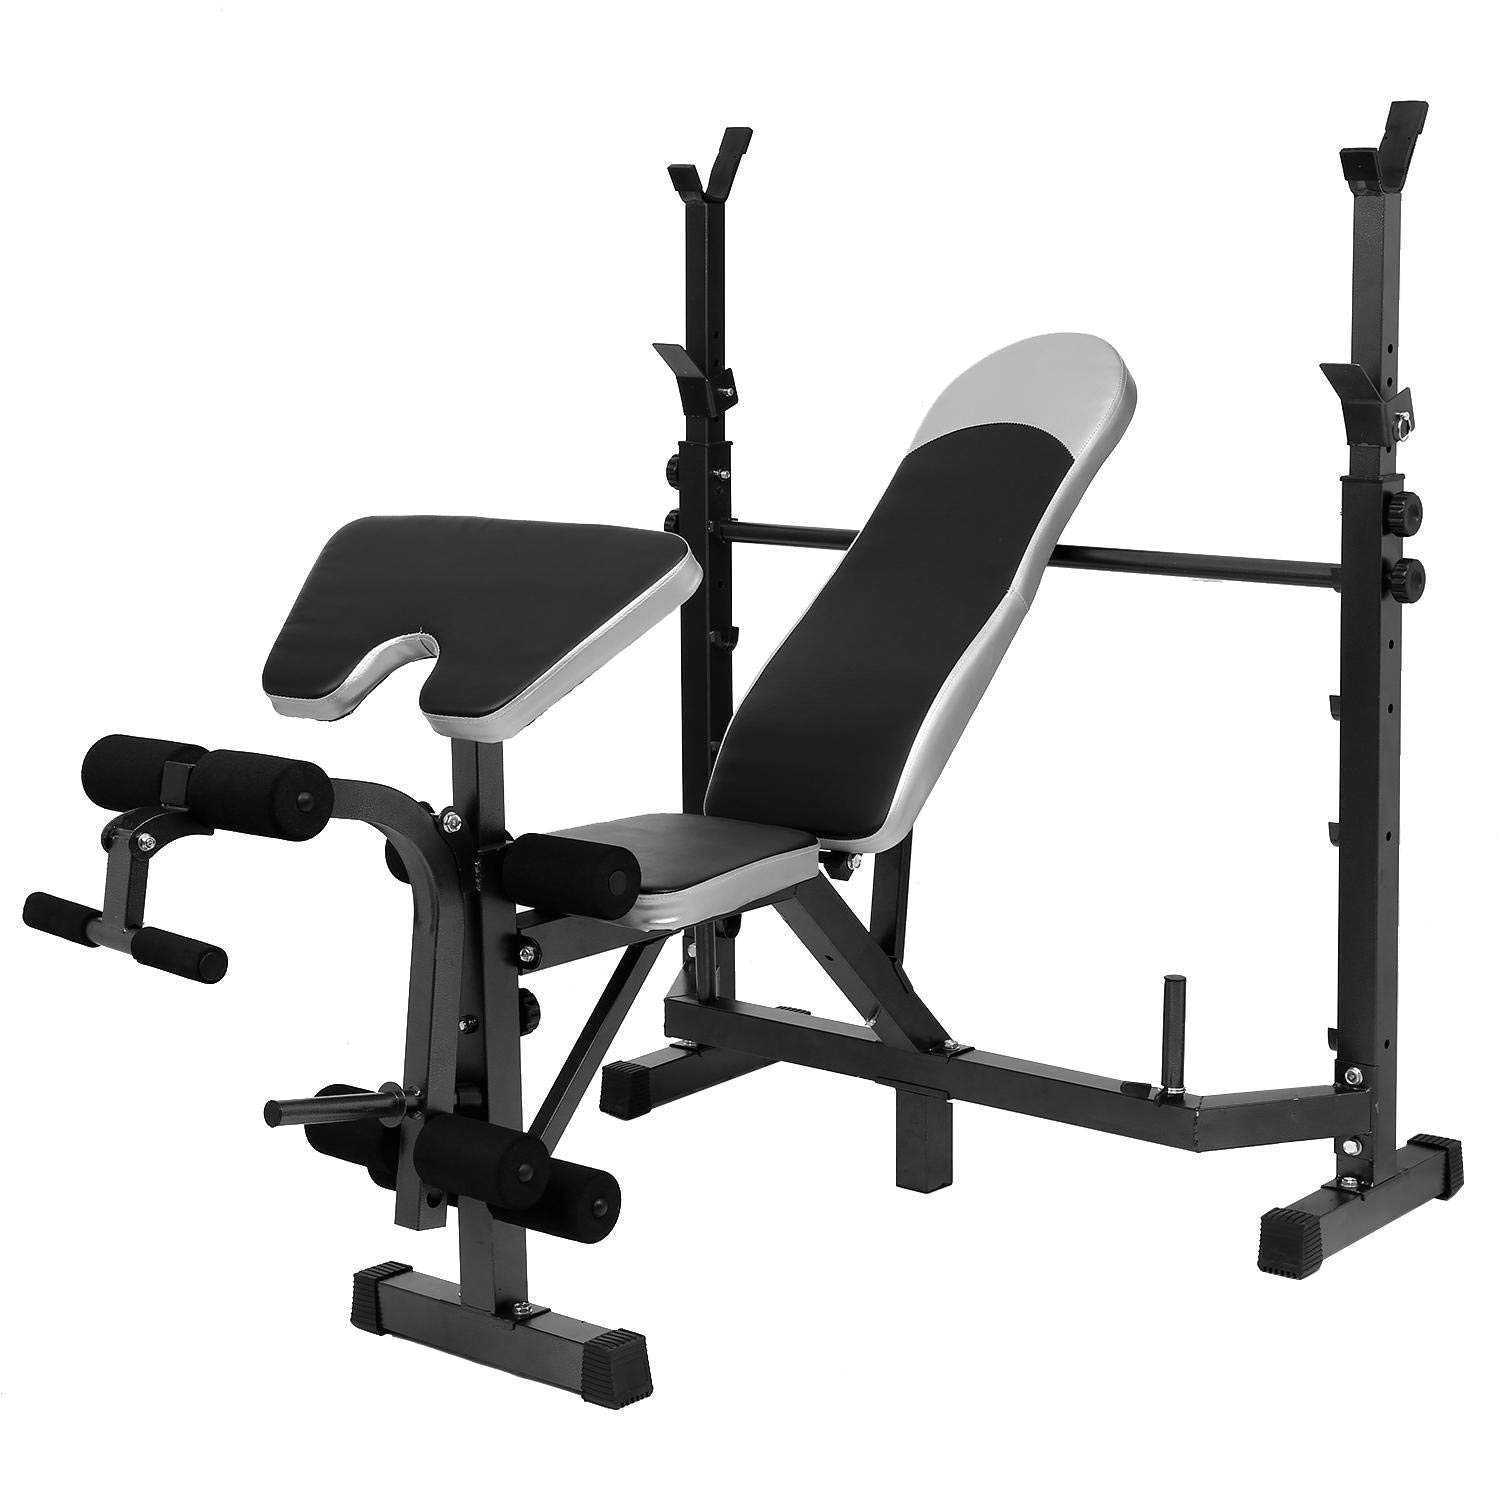 Olympic Bench Press for Sale Amazon Com Multi Function Olympic Workout Bench W Adjustable Squat